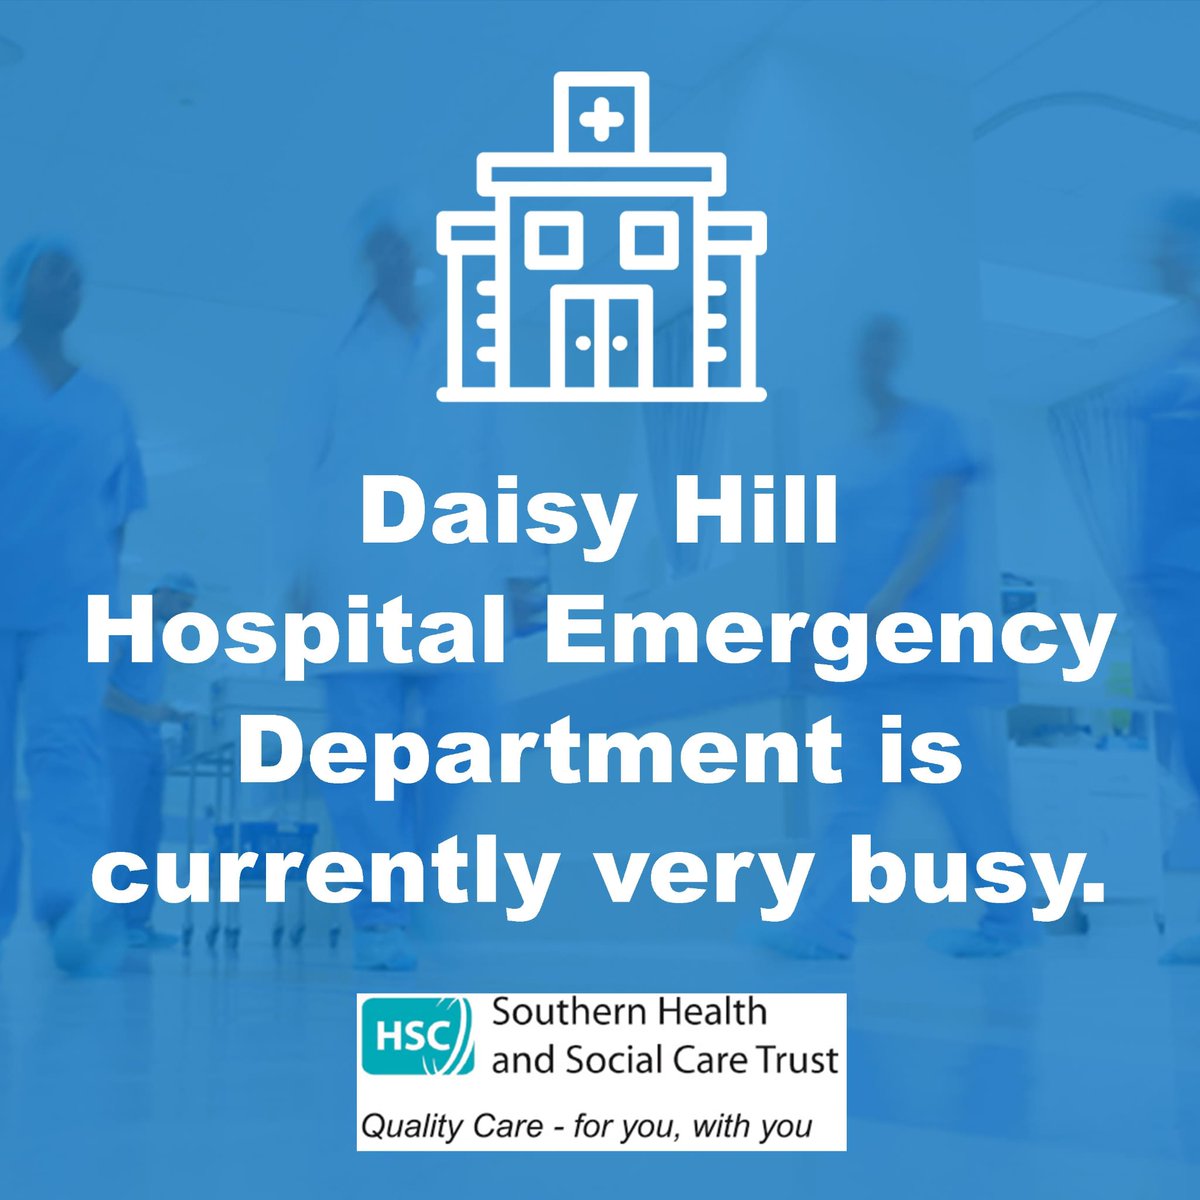 ❗️Daisy Hill Hospital ED is under extreme pressure this evening❗️ Please consider using other services if your condition is urgent. ❗️For any life threatening conditions please dial 999 immediately. Our staff are working tirelessly to prioritise the sickest patients first.